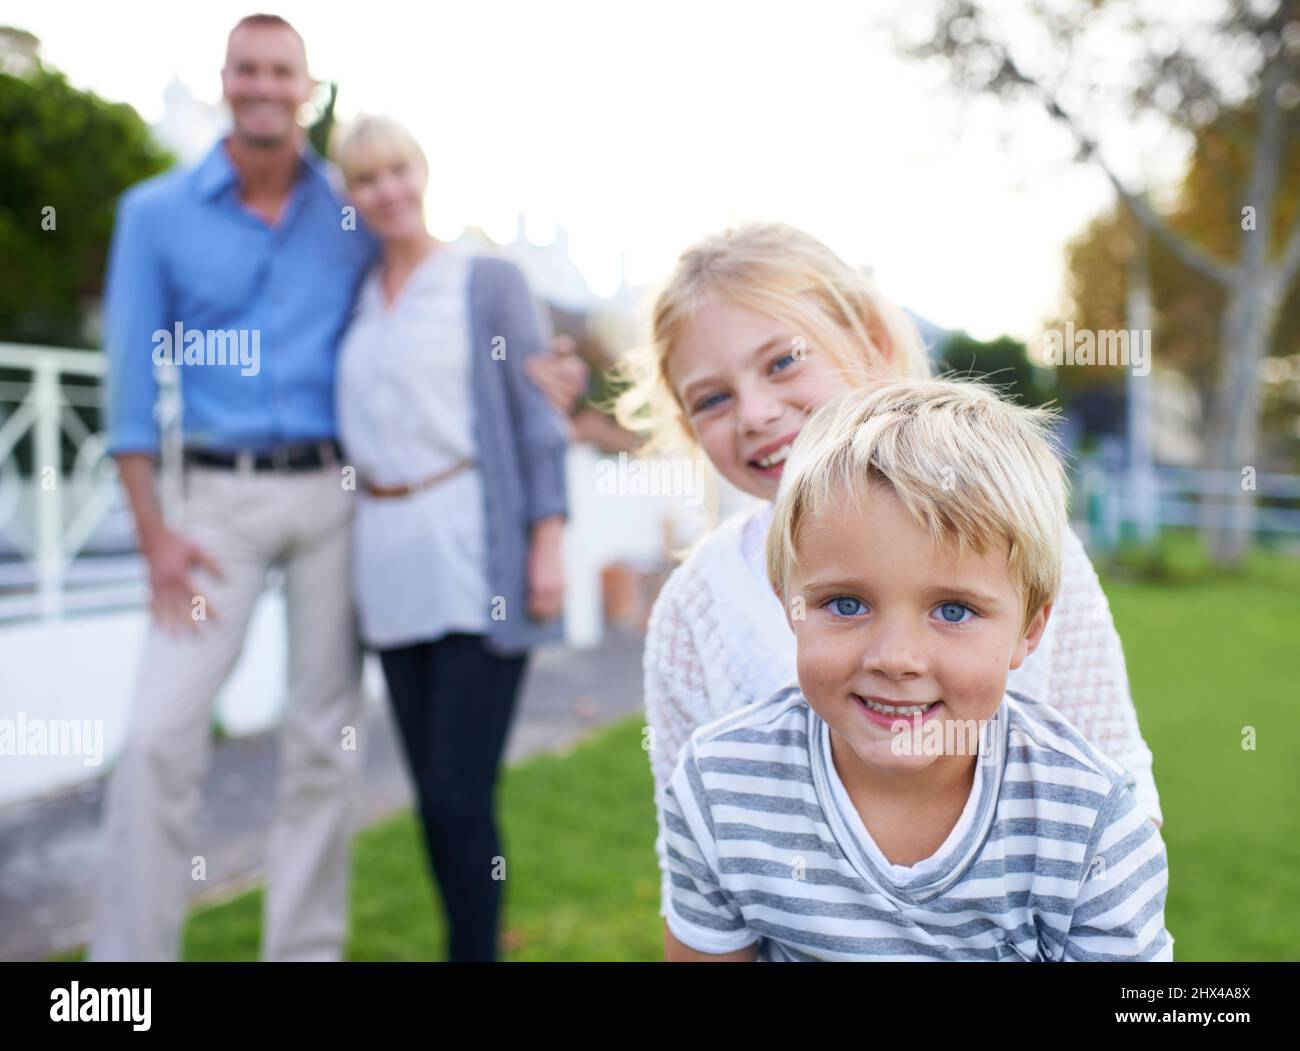 We are so proud of our kids. A happy two generation family smiling while outdoors. Stock Photo